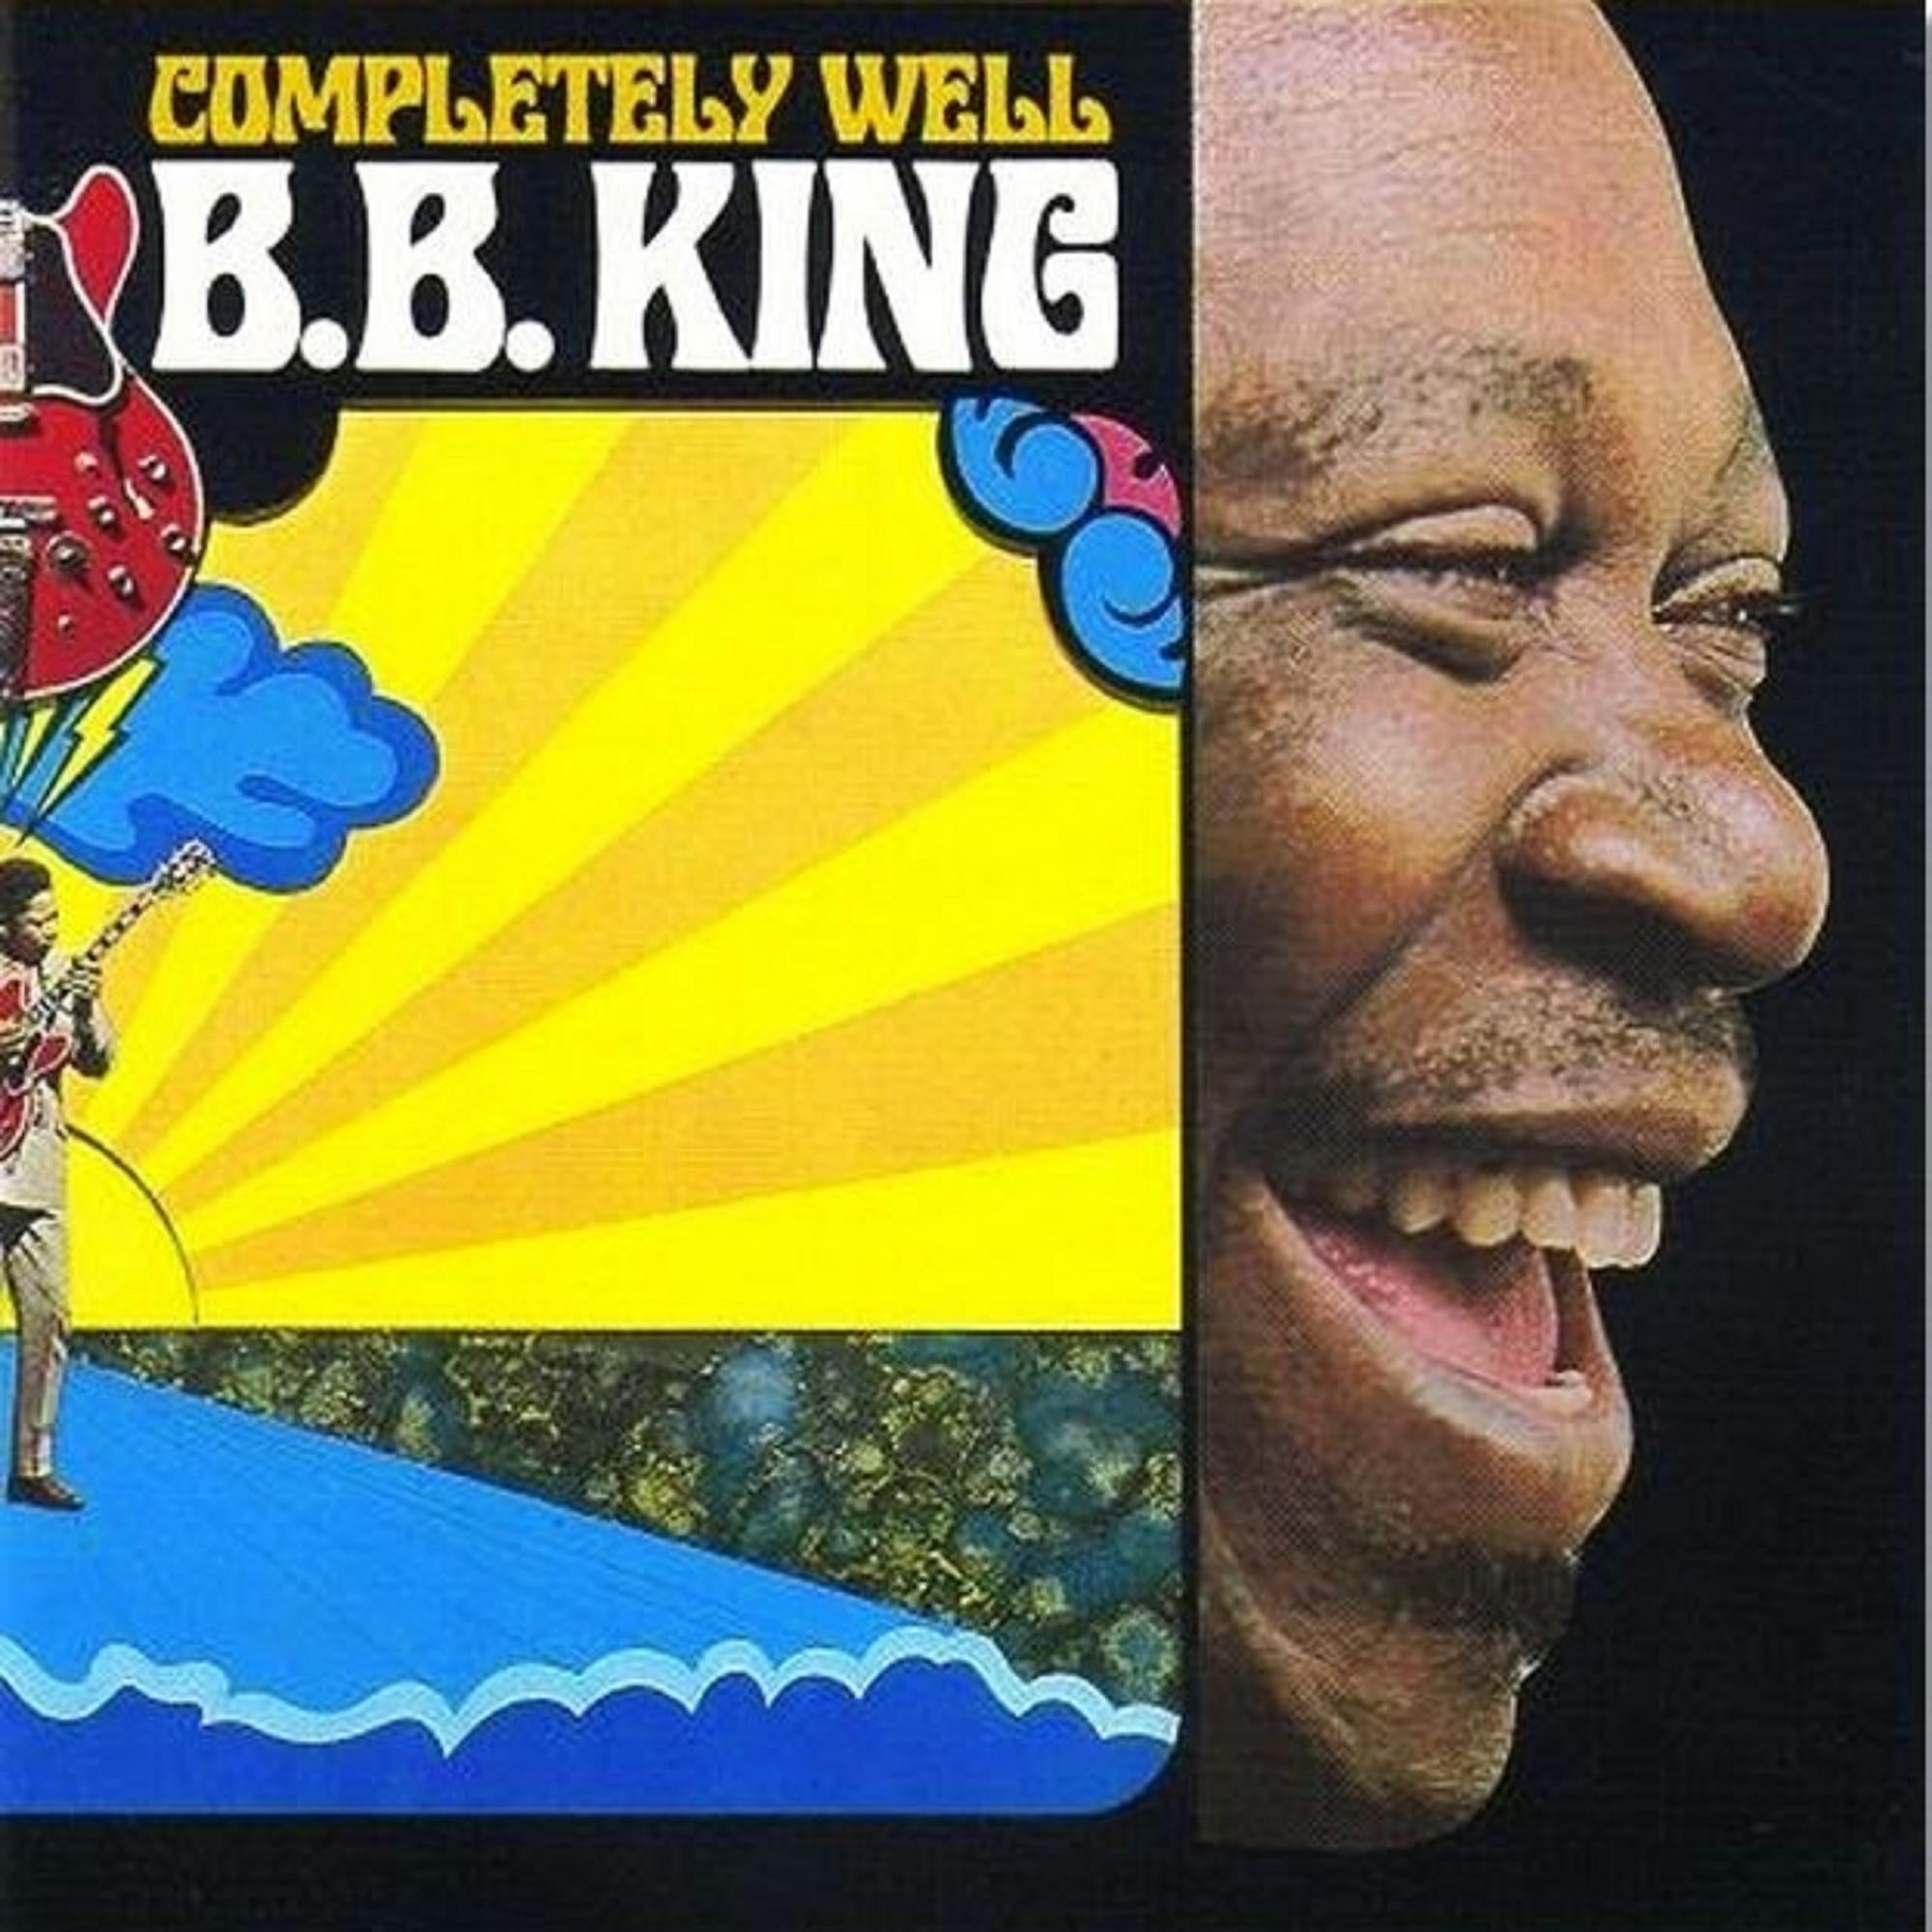 B.B. King – Completely Well (1969) - New LP Record 2022 Friday Music Vinyl - Blues